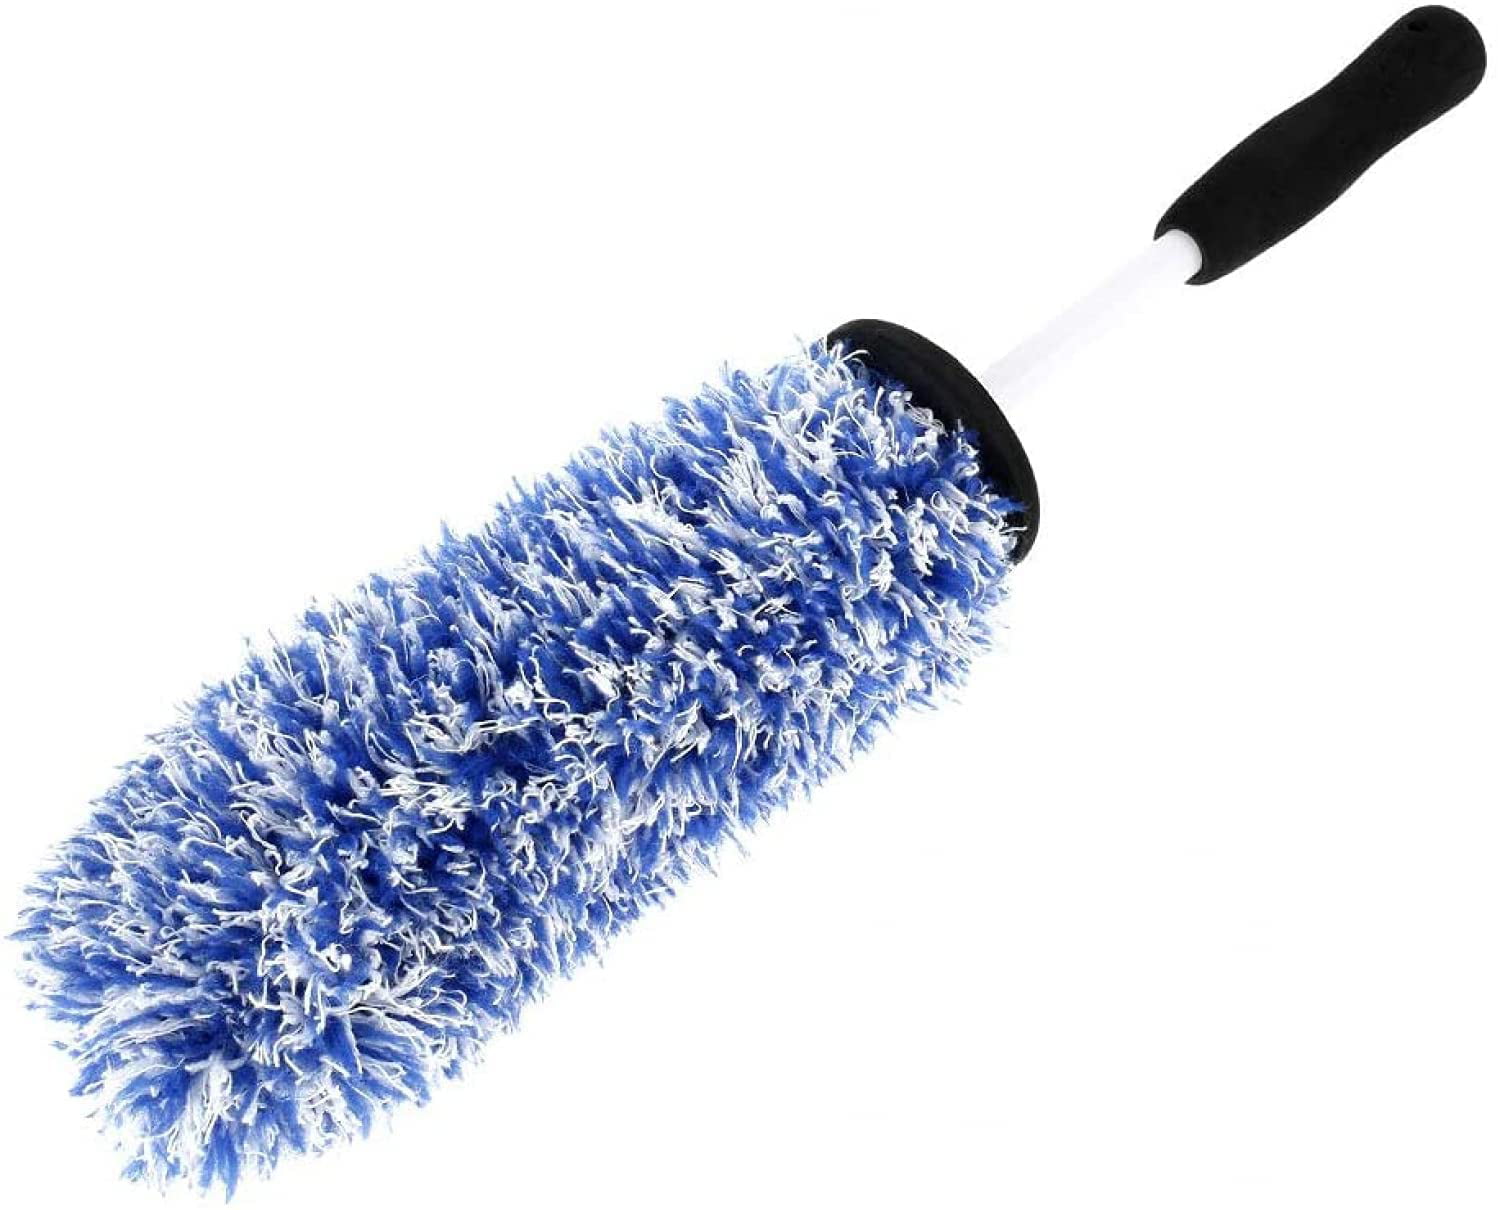 Car Alloy Rim Cleaning Brushes|Non 5cm£© Scratch Ultra Soft Detailing Brush Microfiber Scrub Car-Styling Auto Care Dust Remove Washing Tool £¨27 